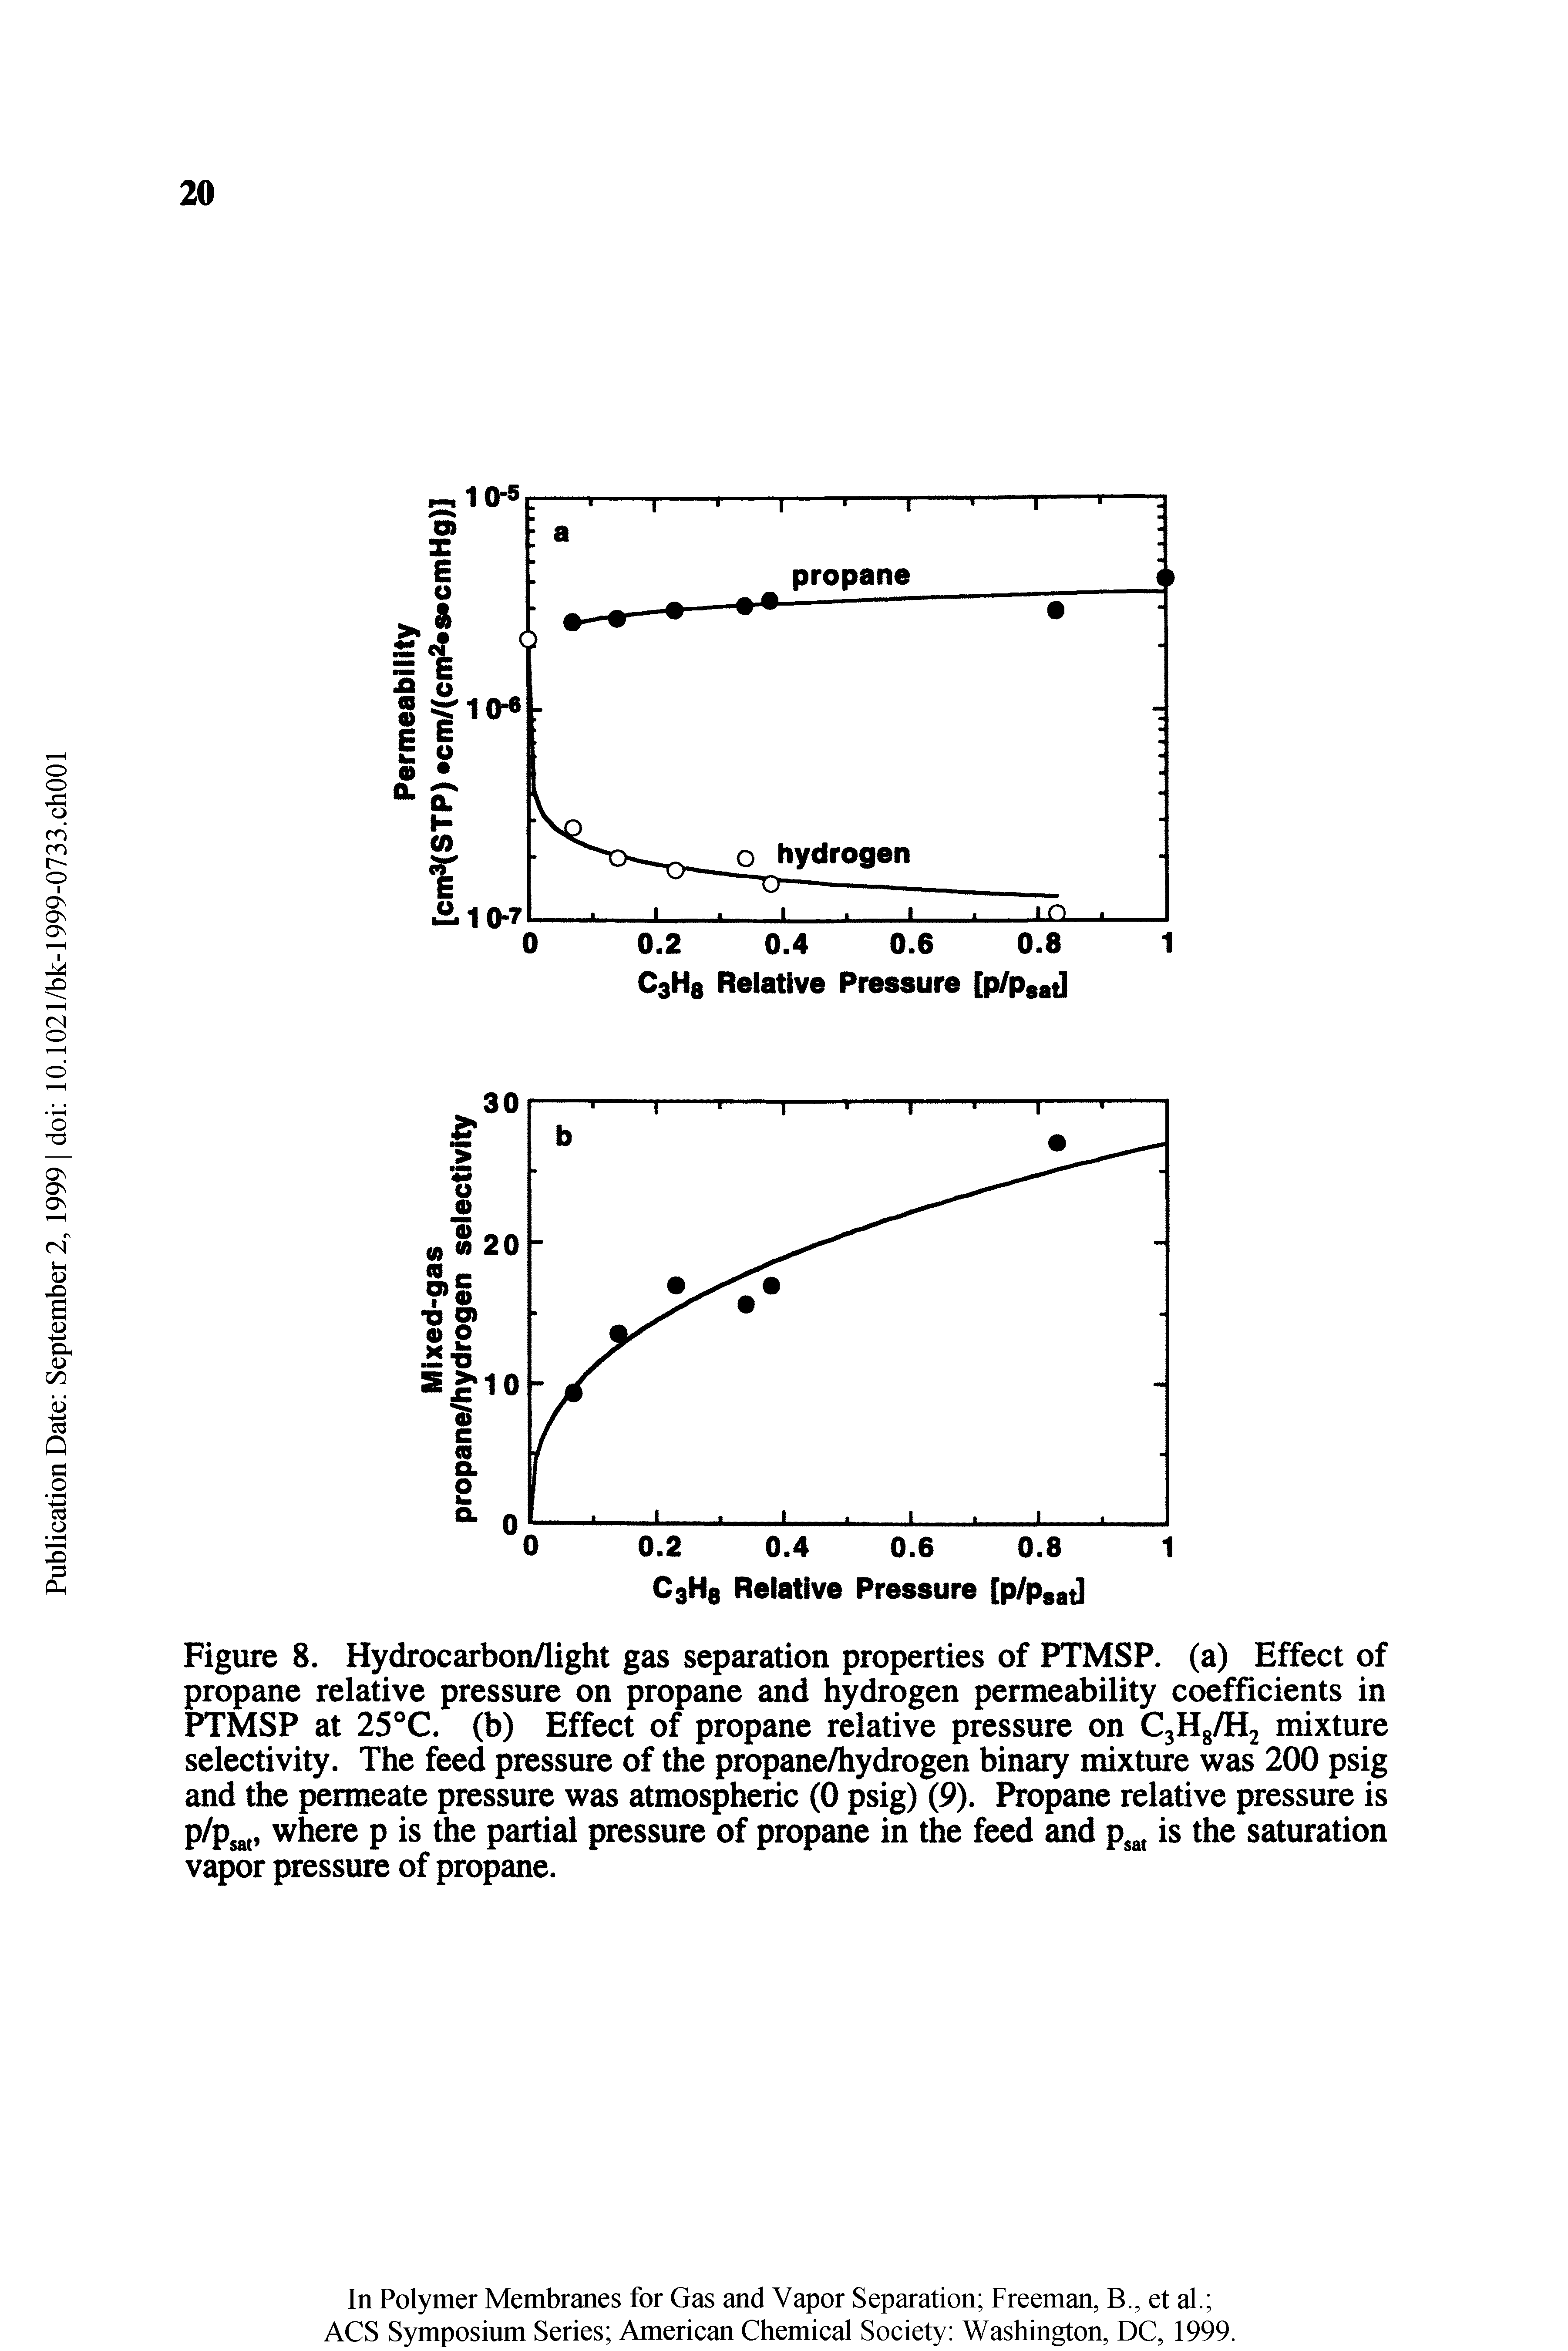 Figure 8. Hydrocarbon/light gas separation properties of PTMSP. (a) Effect of propane relative pressure on propane and hydrogen permeability coefficients in PTMSP at 25°C. (b) Effect of propane relative pressure on C3H8/H2 mixture selectivity. The feed pressure of the propane/hydrogen binary mixture was 200 psig and the permeate pressure was atmospheric (0 psig) (9). Propane relative pressure is p/psa, where p is the partial pressure of propane in the feed and p, is the saturation vapor pressure of propane.